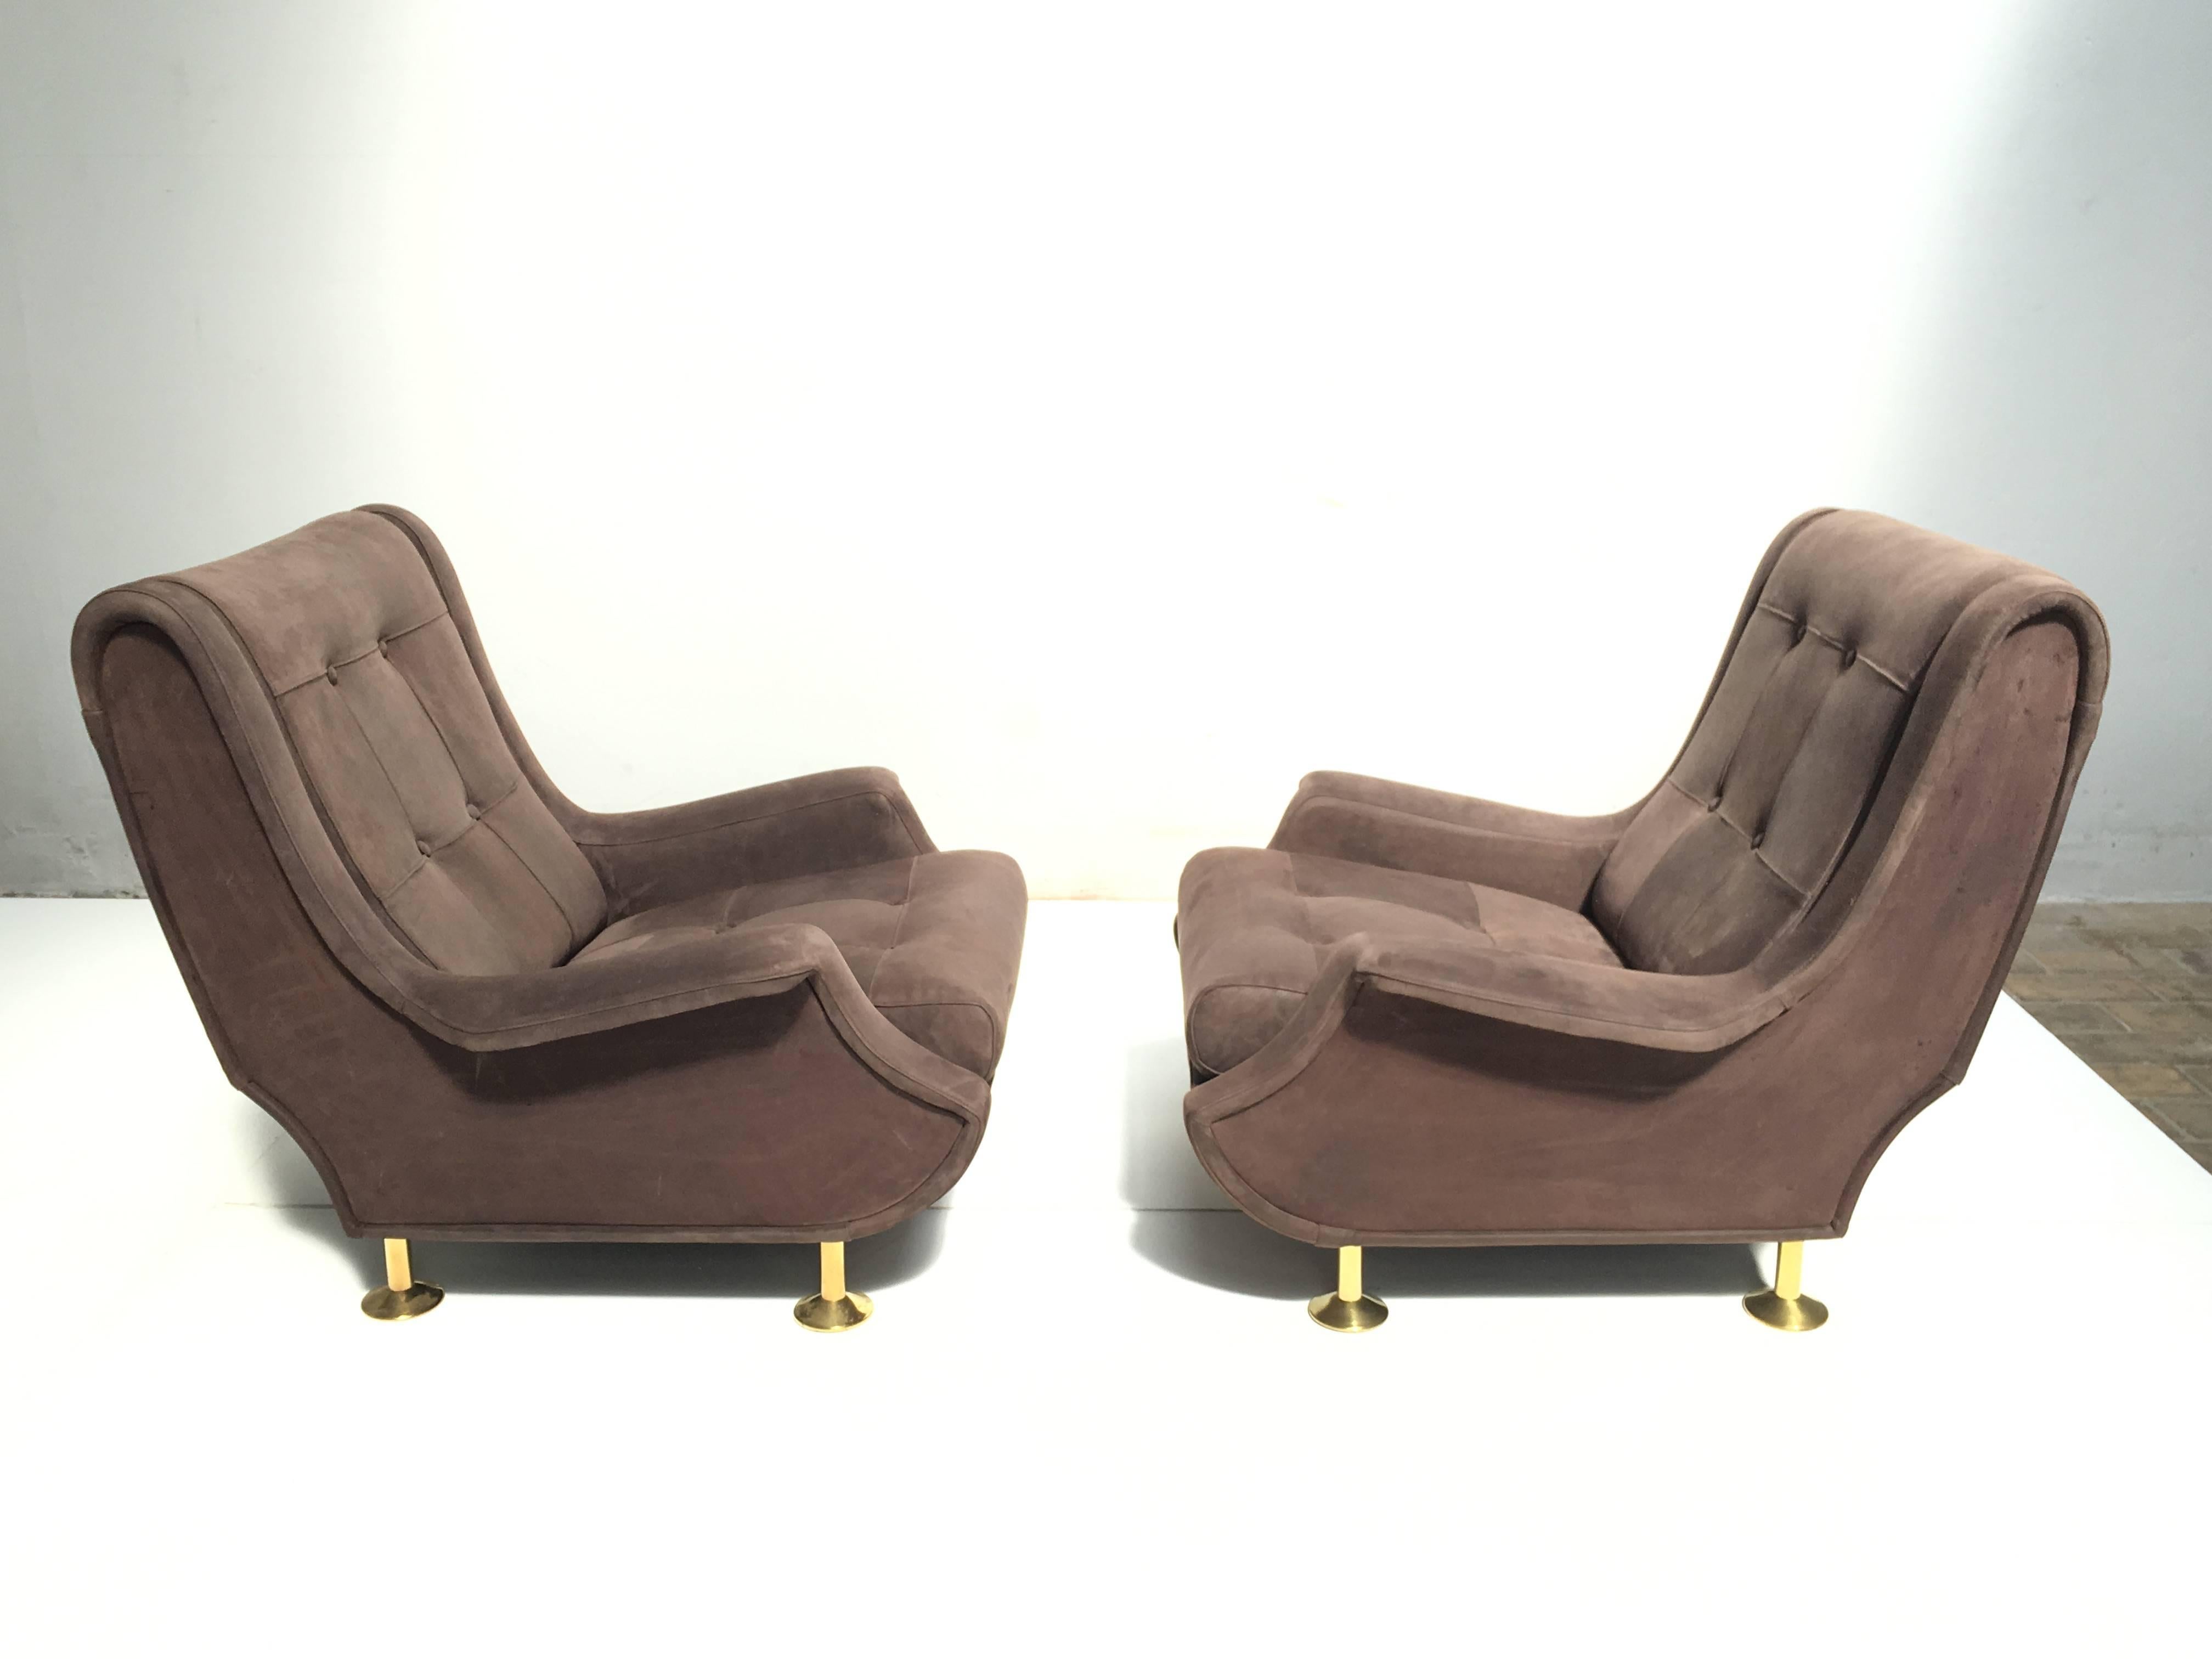 Mid-20th Century Fully Restored Zanuso Regent Chairs Pair Finished in Nappa Leather, Arflex, 1960